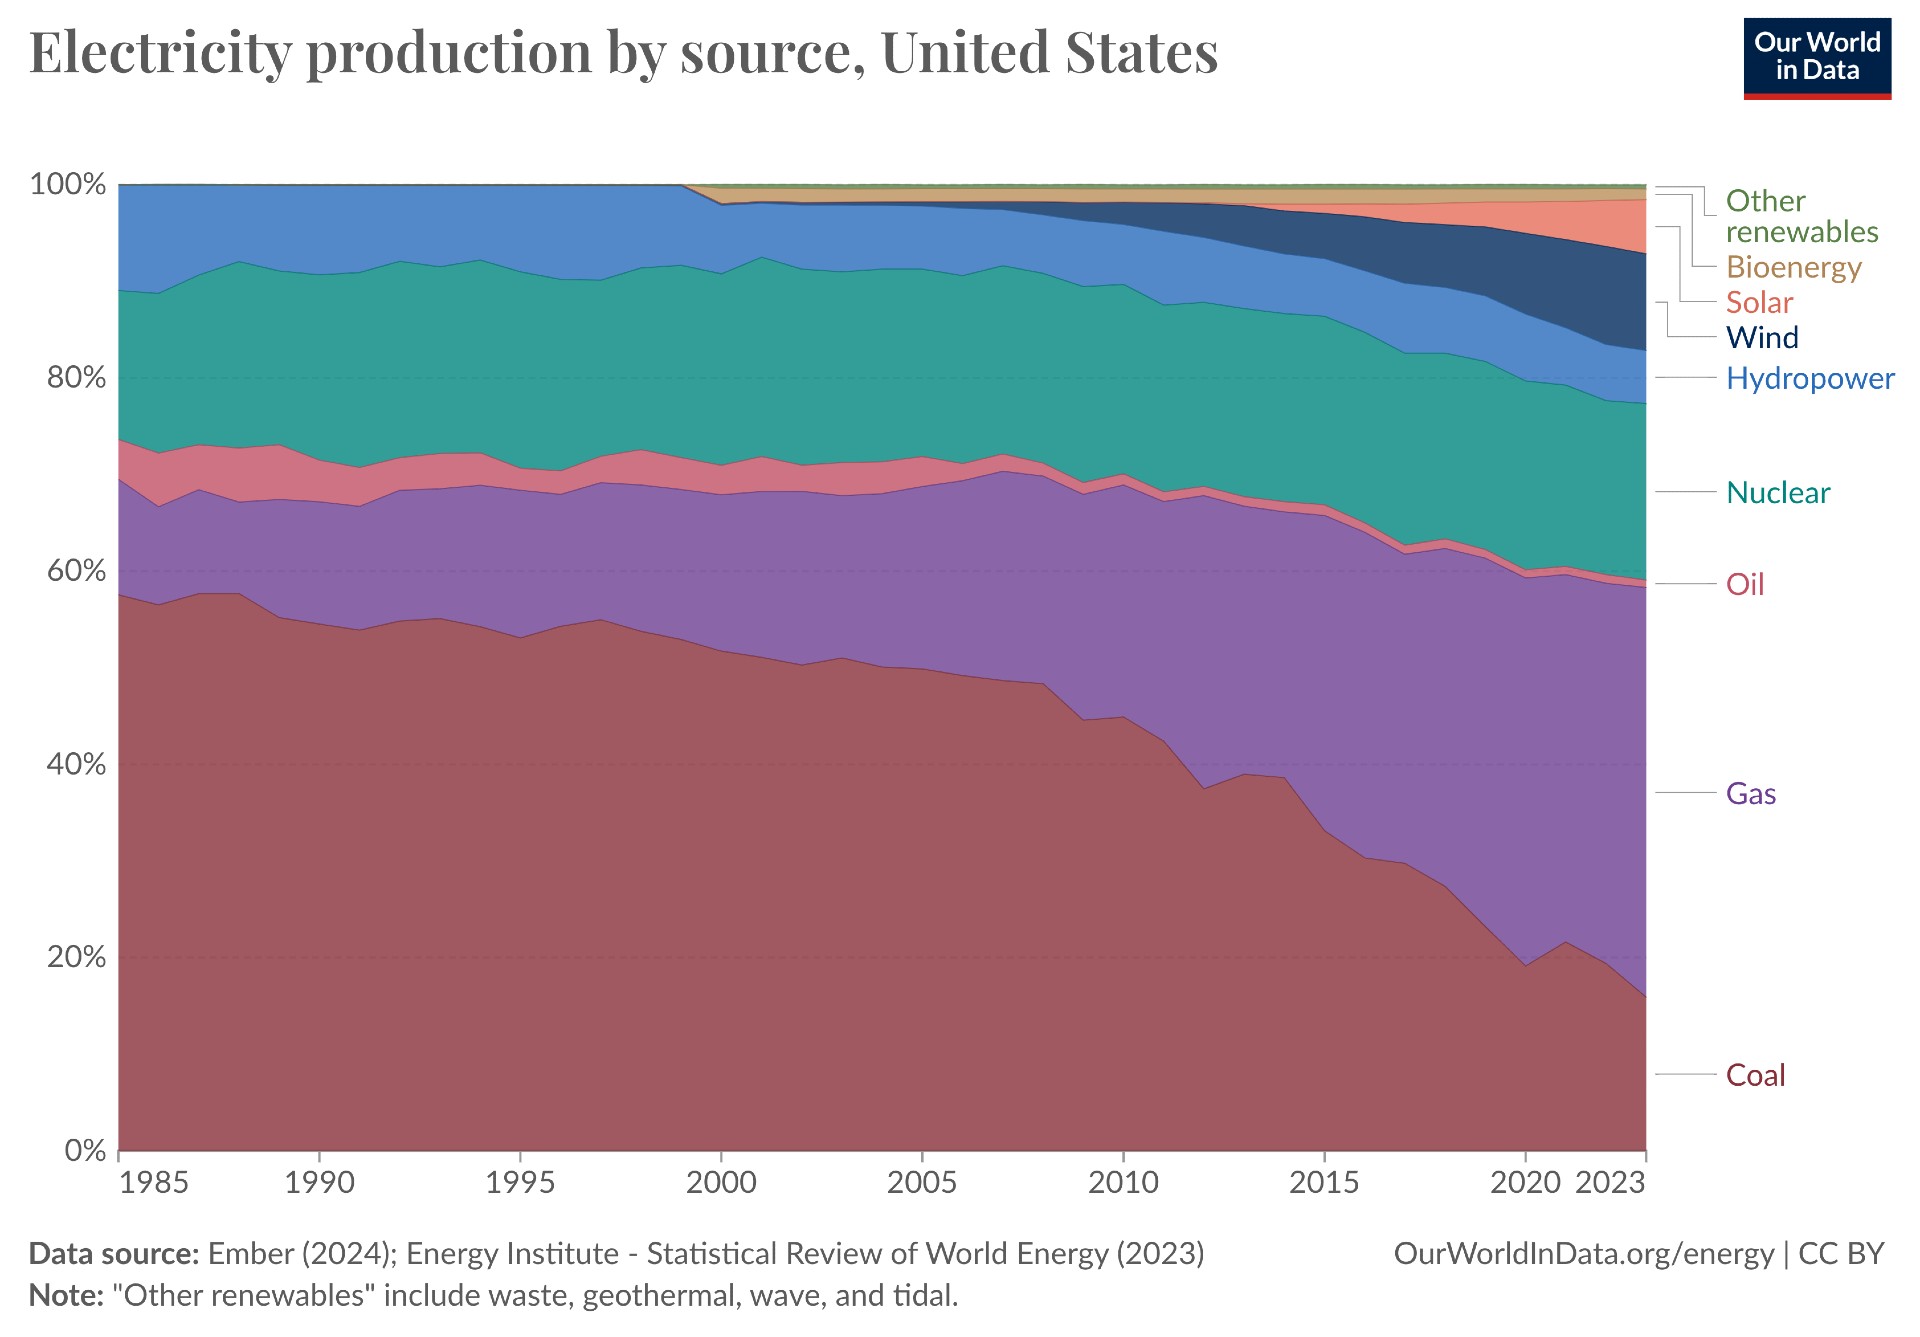 Stacked area chart showing changes in U.S. electricity production sources from 1985 to 2023. Gas and solar increased significantly, while coal and nuclear power have decreased.